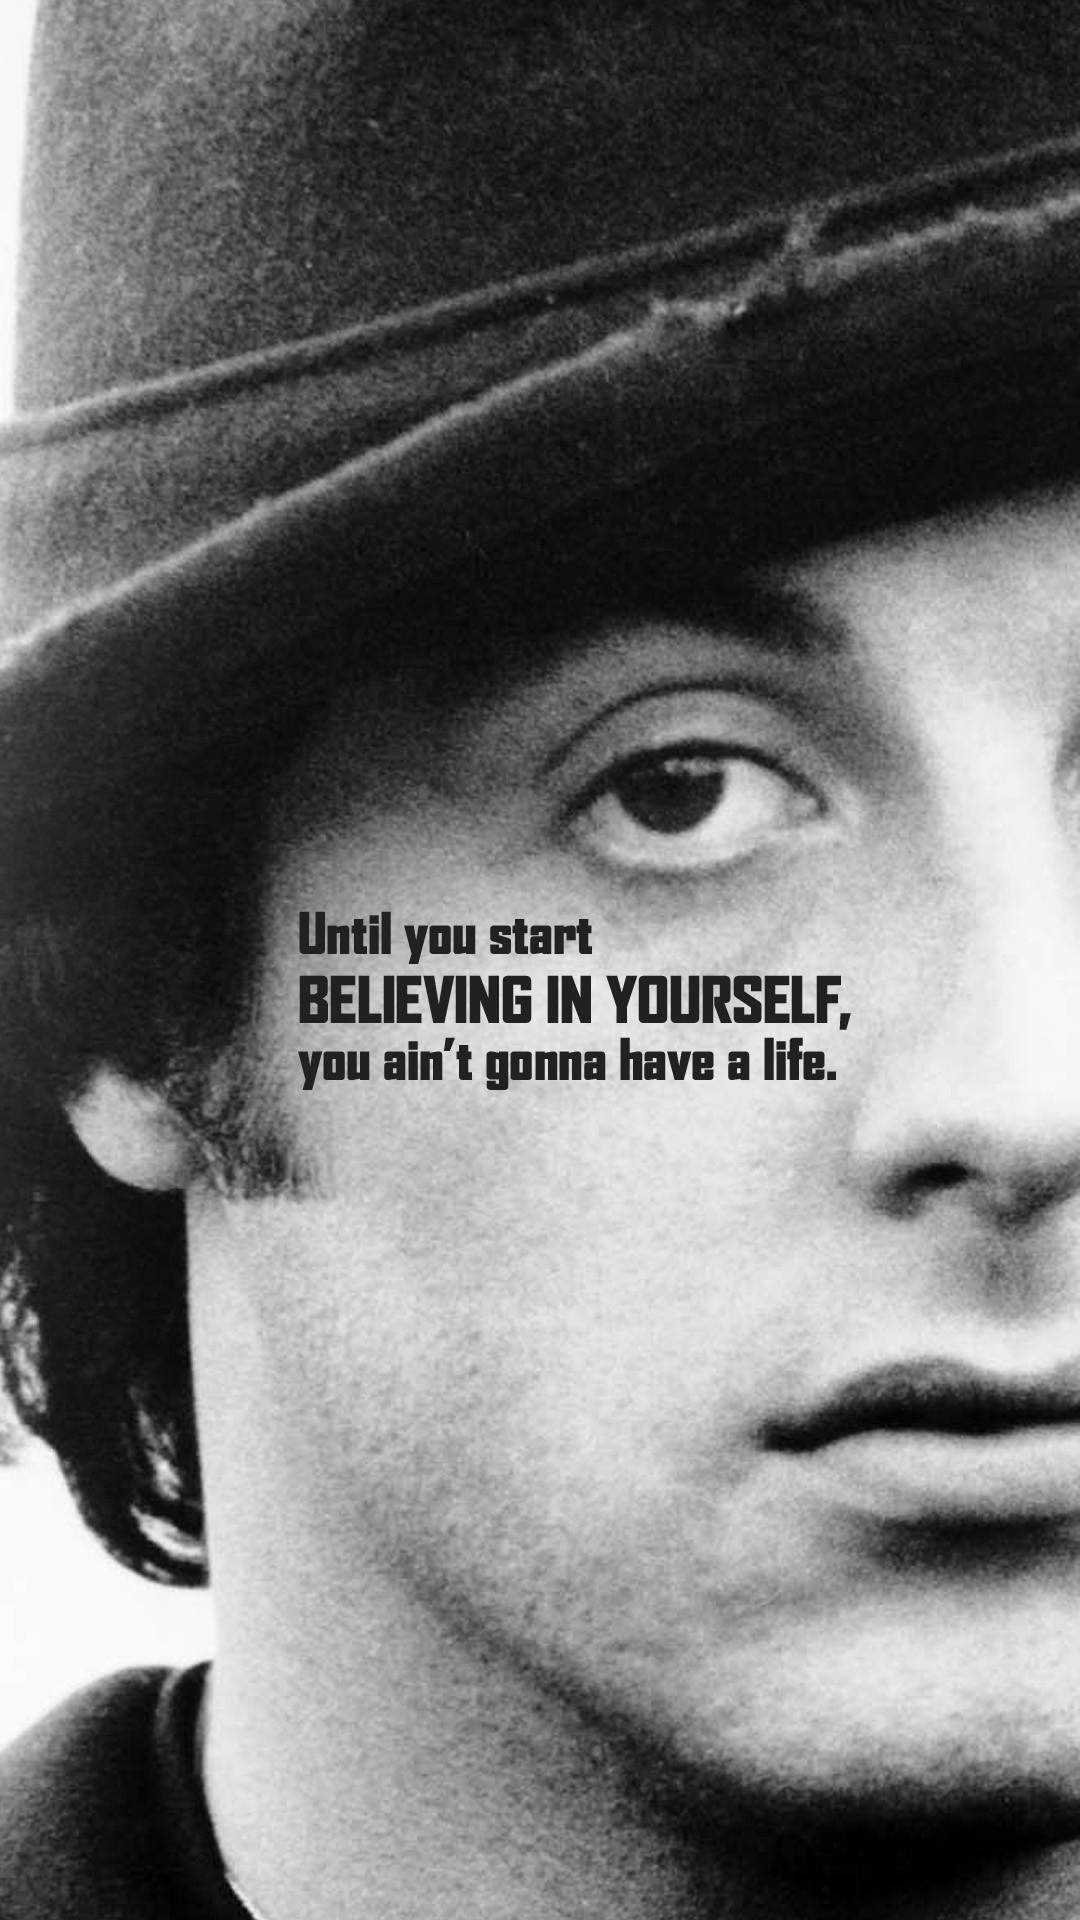 Wallpaper Weekends Rocky Balboa for Your iPhone